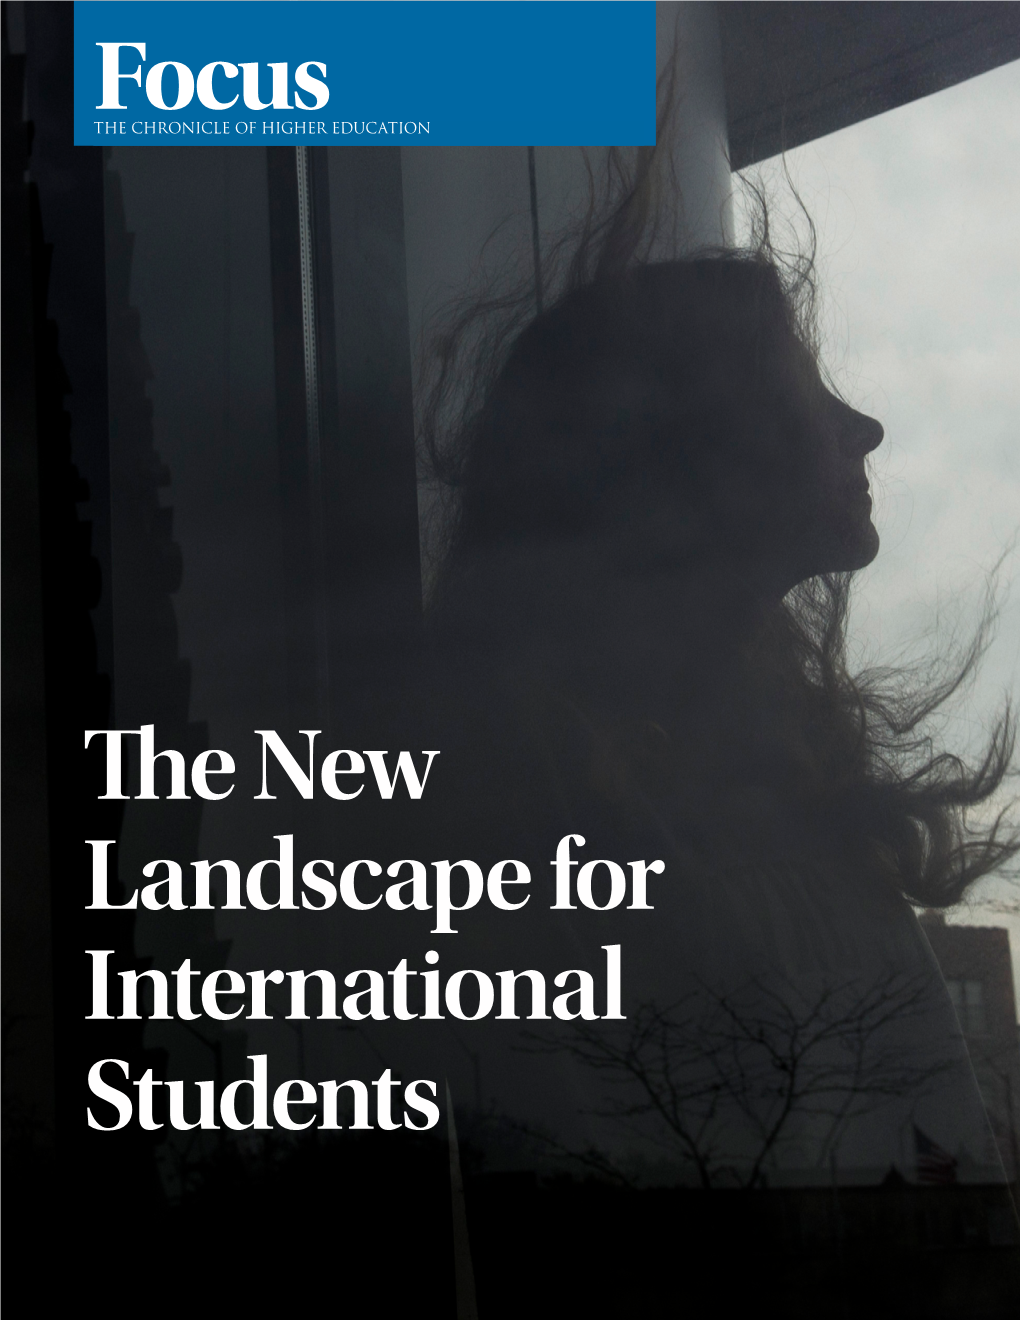 The New Landscape for International Students